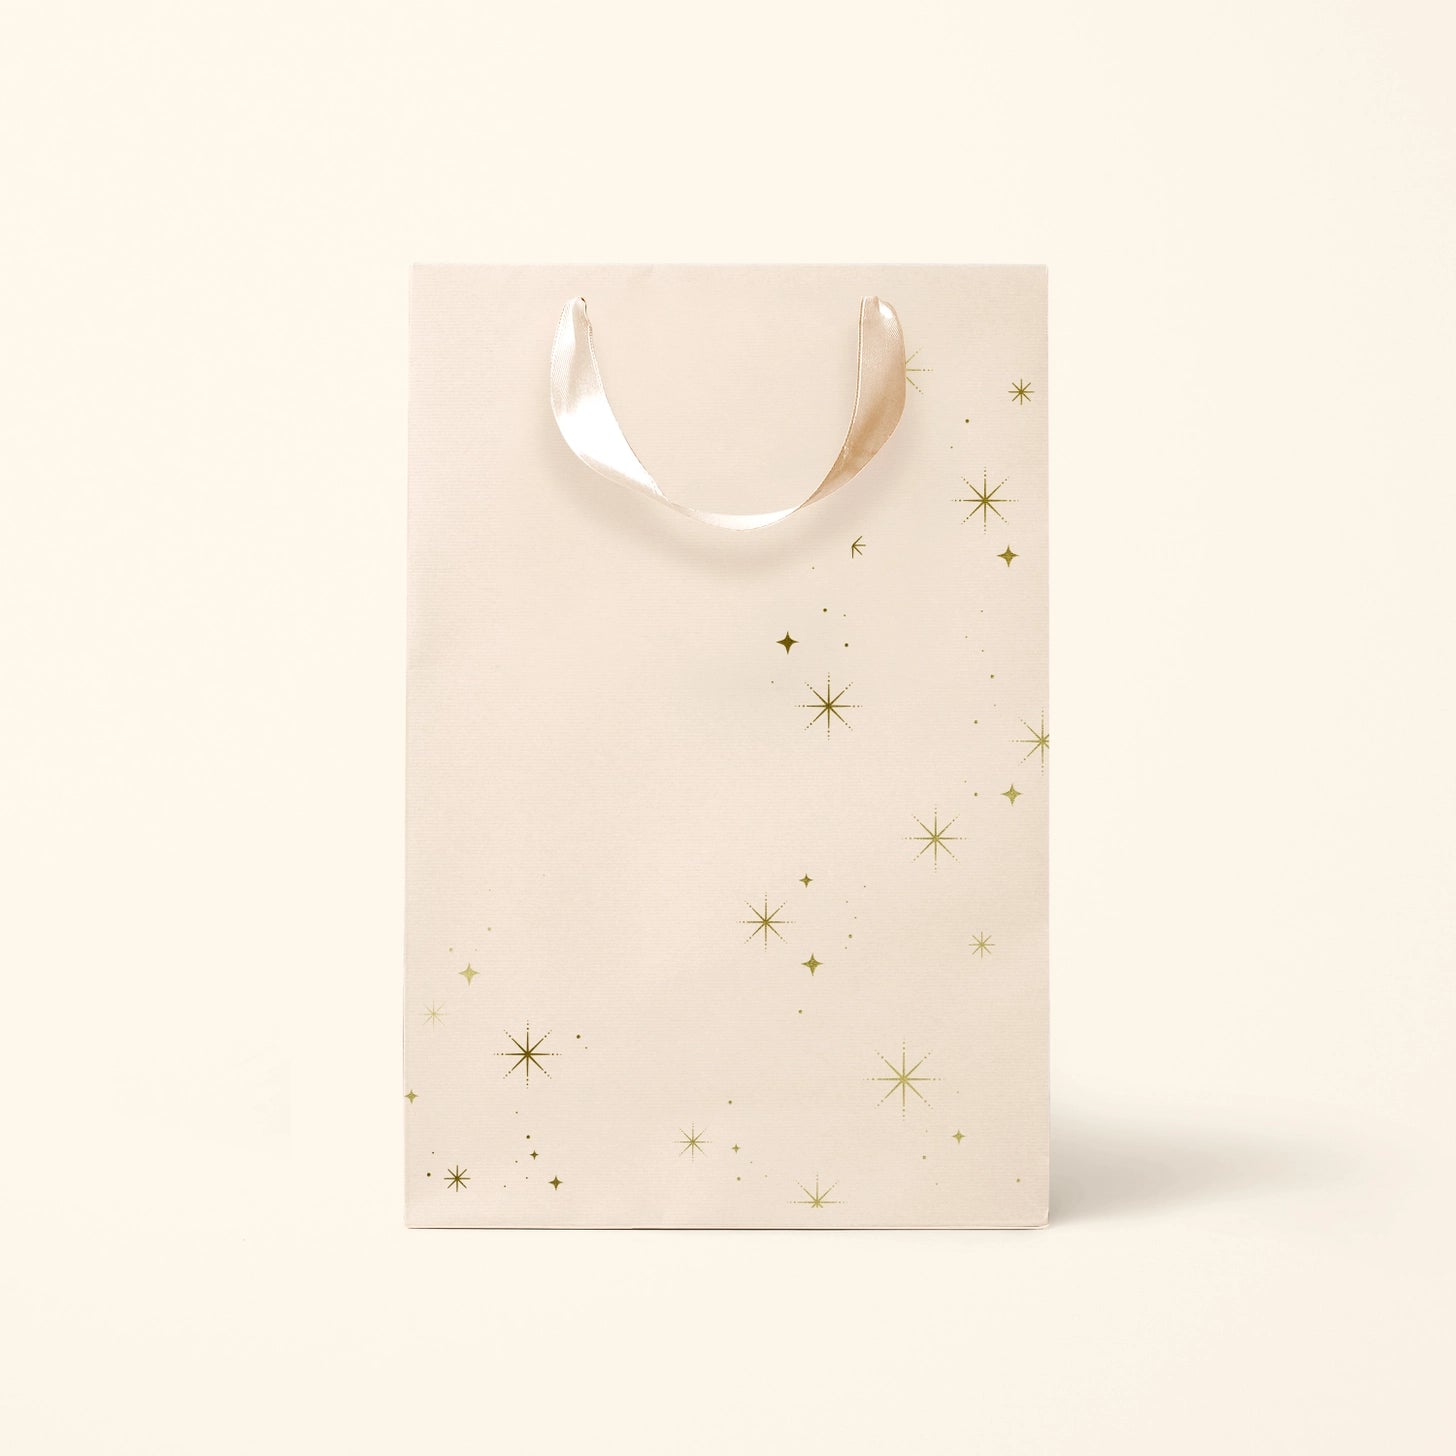 On an ivory background is a light pink gift bag with gold star details.